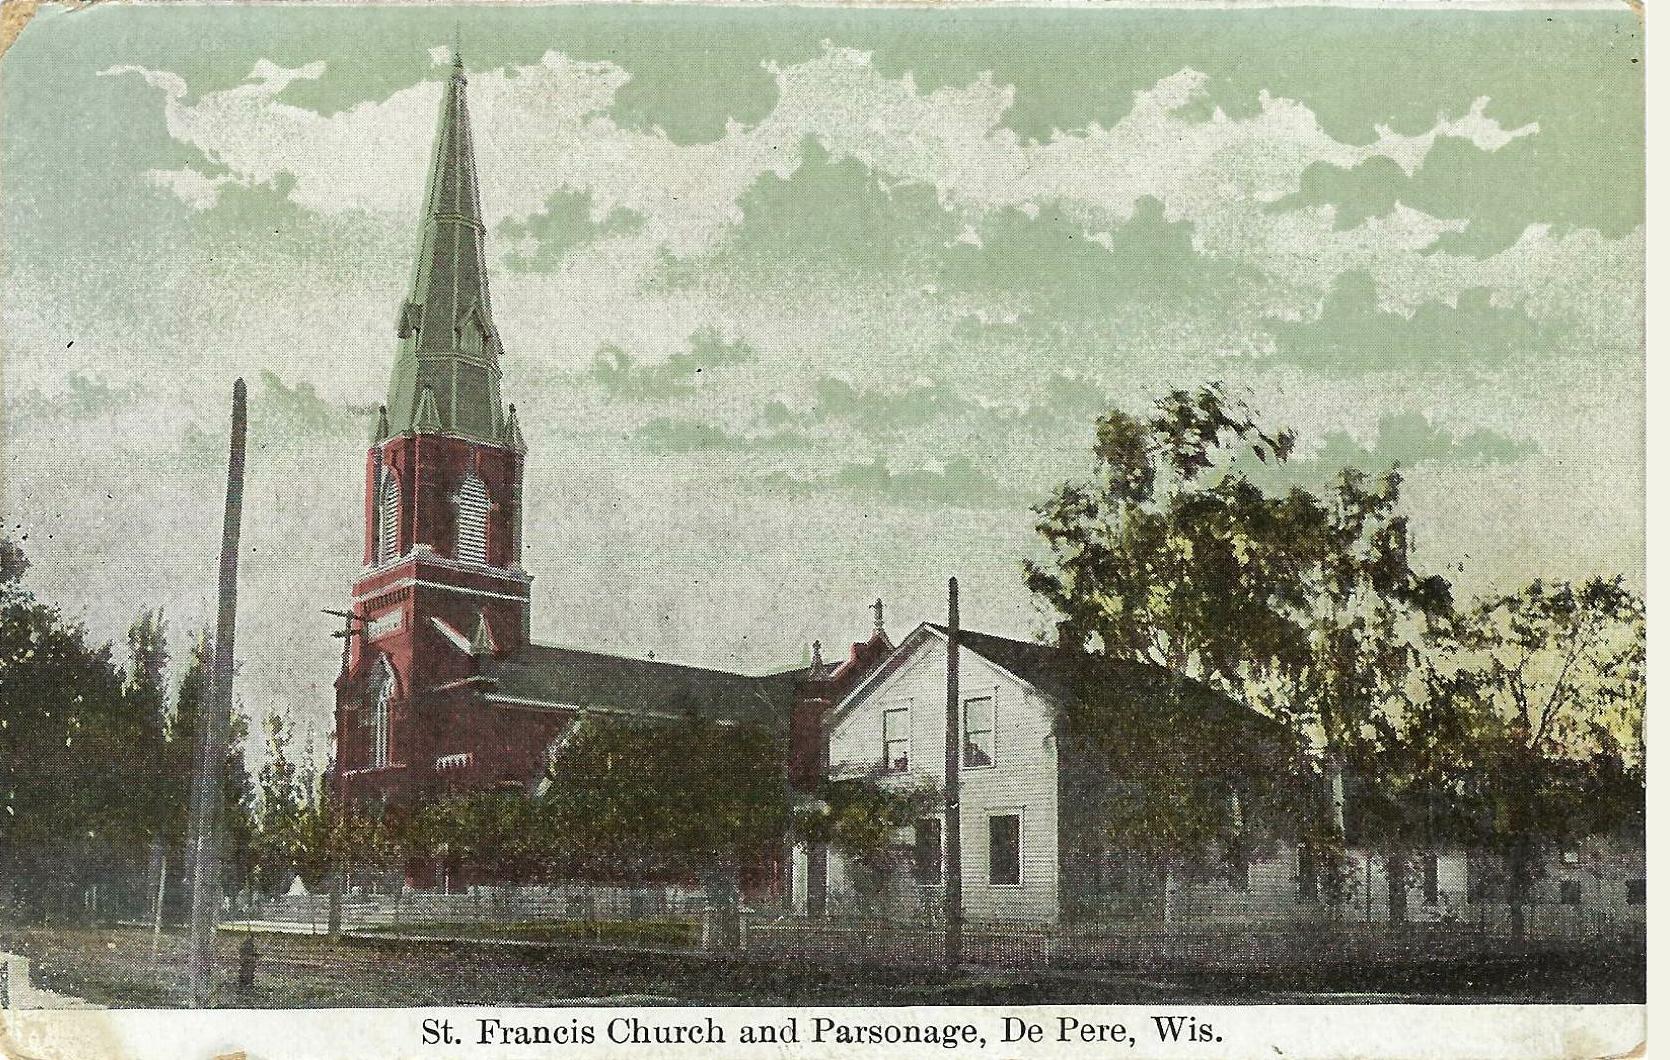 St. Francis Church and Parsonage